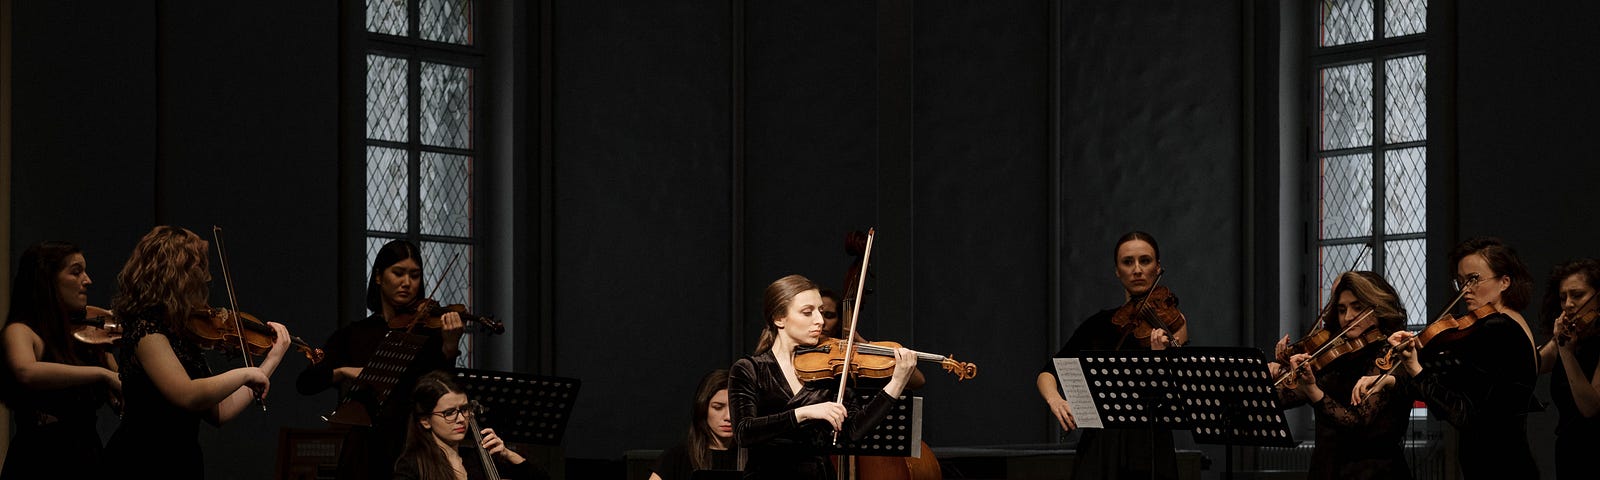 A violin soloist plays in front of an orchestra. She has a spotlight on her.